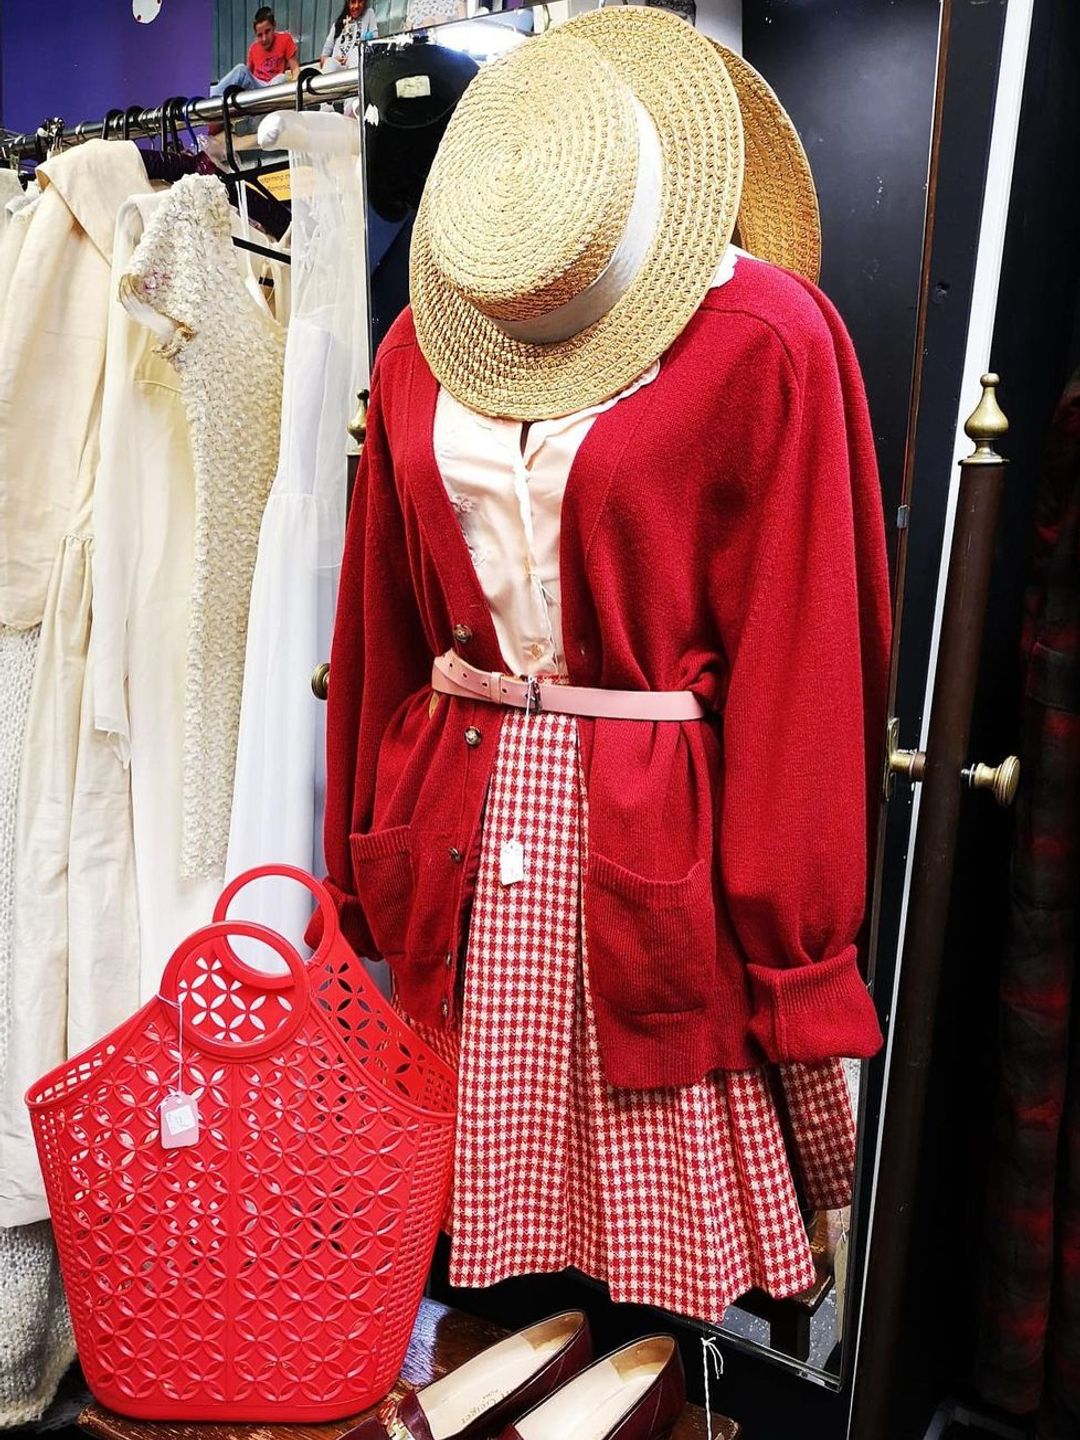 Shop mannequin with red cardigan and geometric cut-out bag 